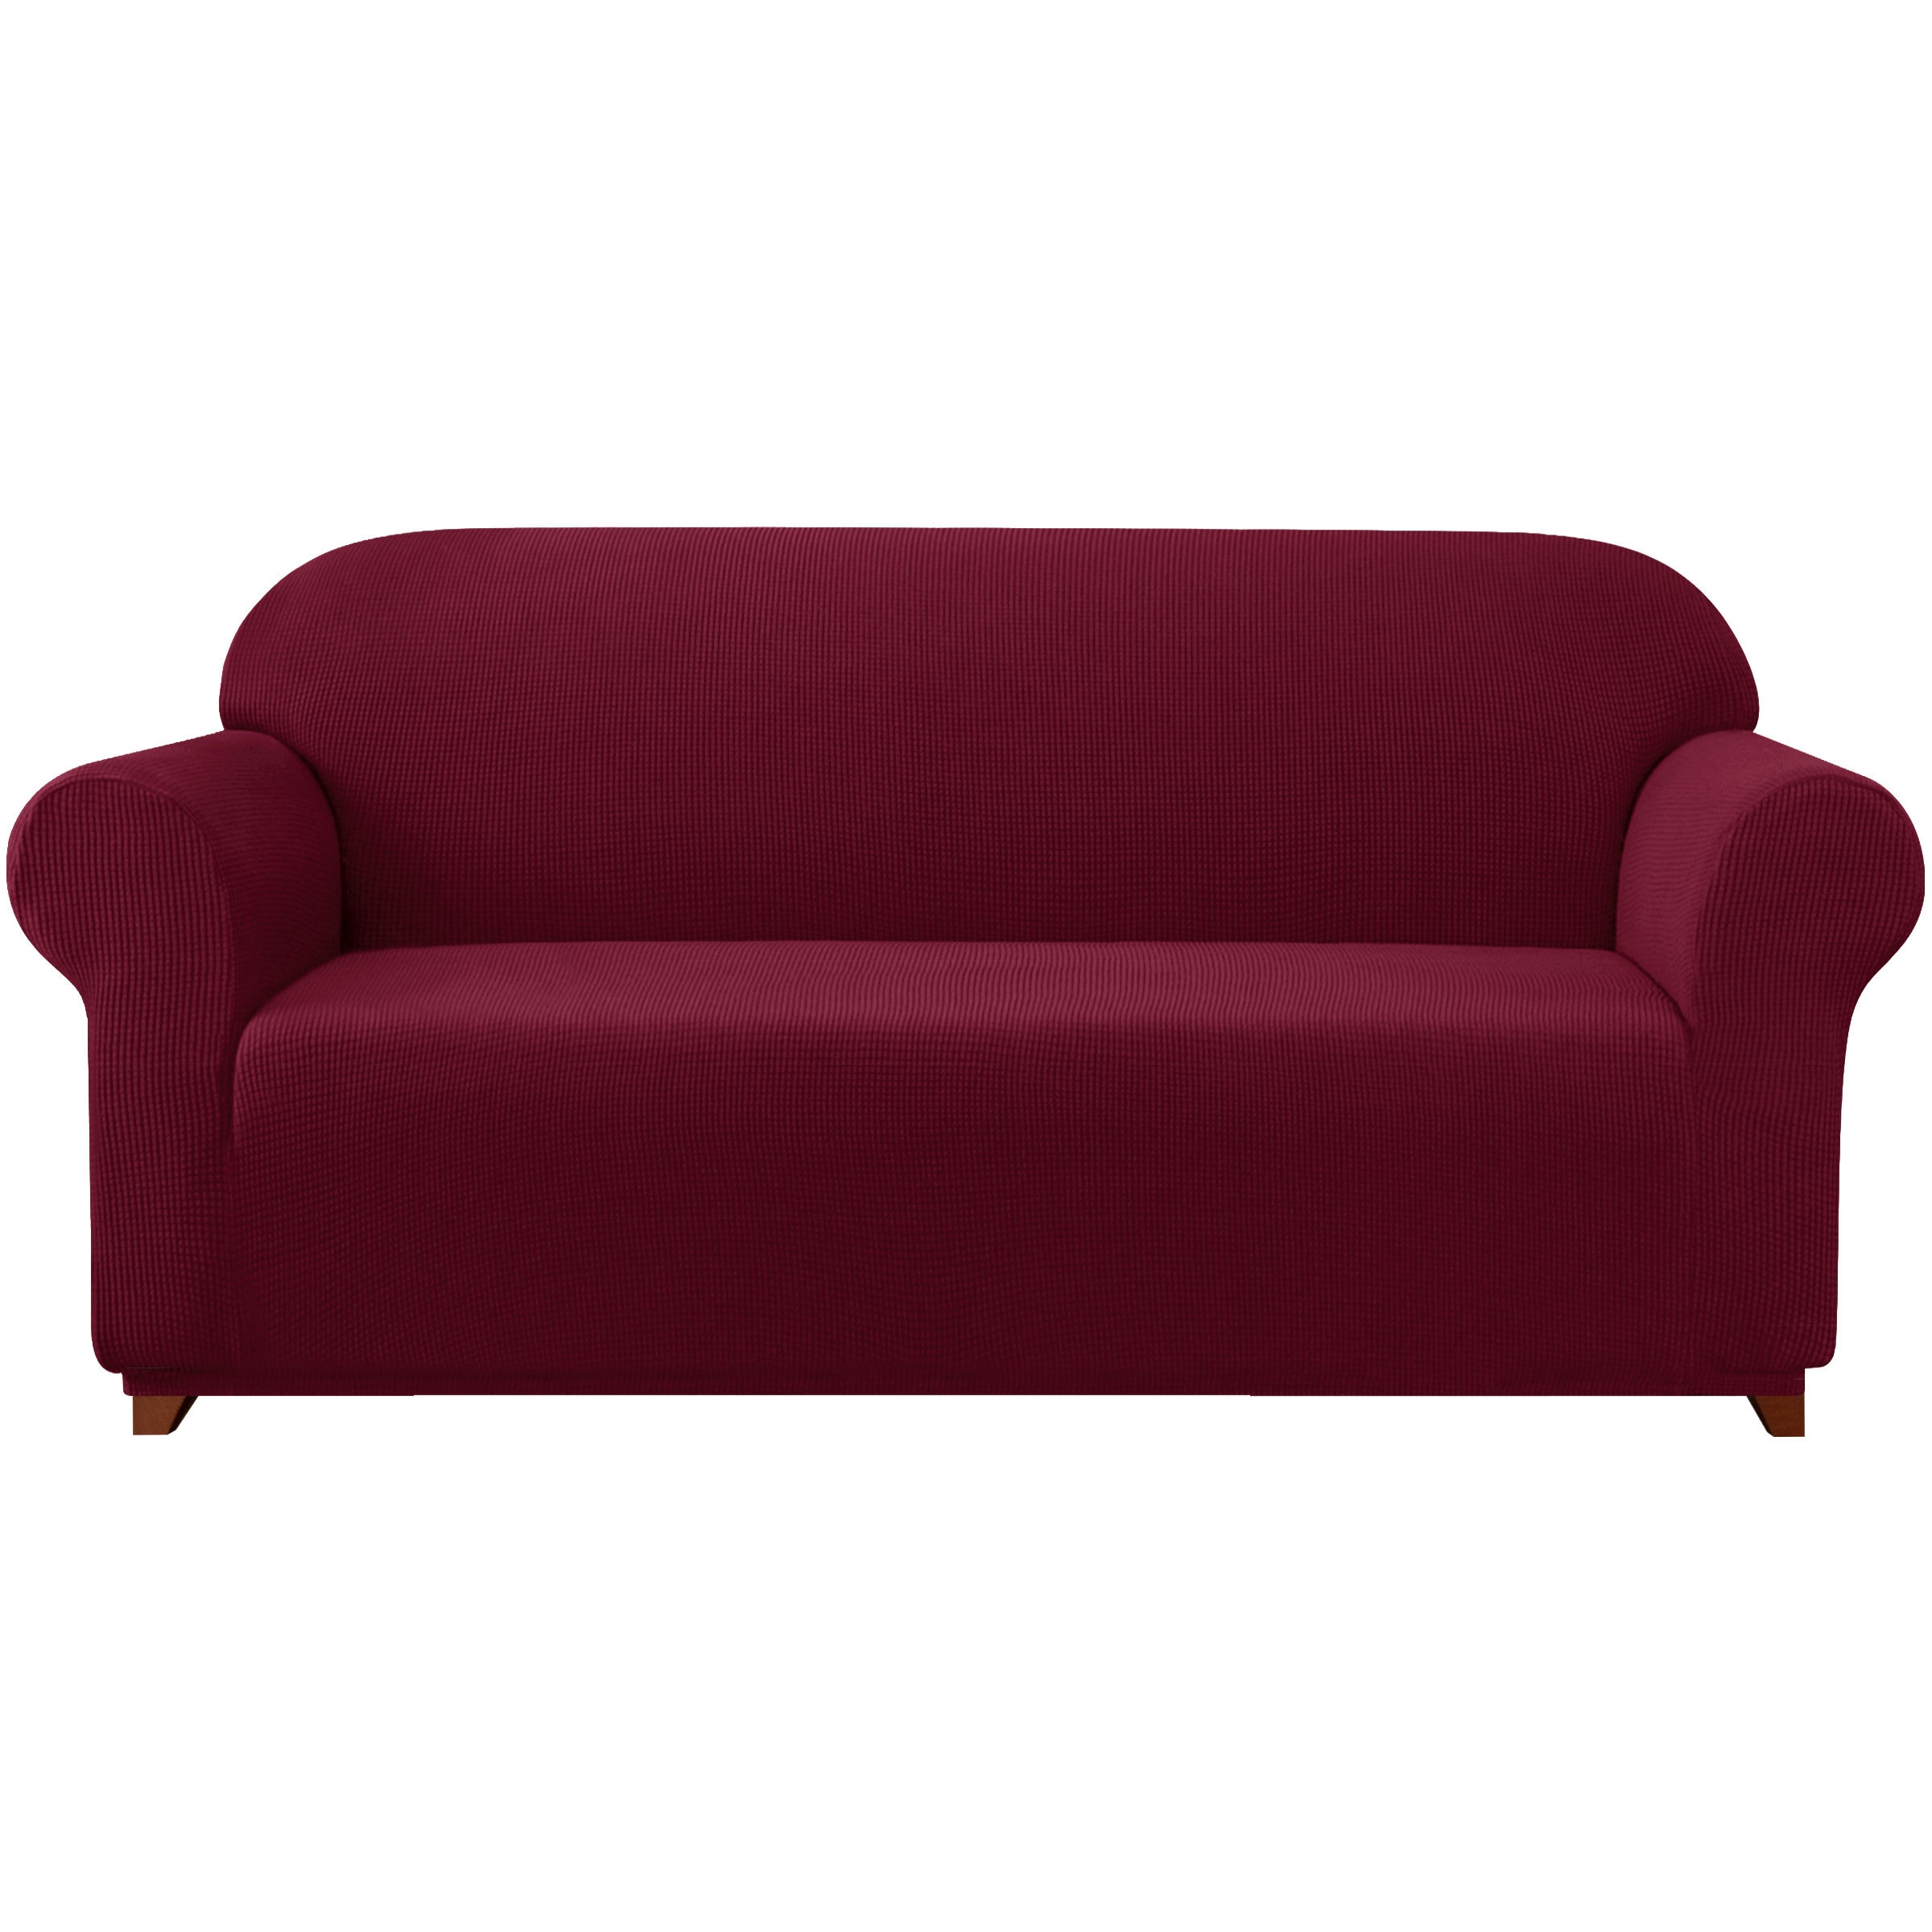 Textured Grid Wine Jacquard Sofa Slipcover 118-in W x 41-in H x 42-in D Polyester | - Subrtex SBTSF3002